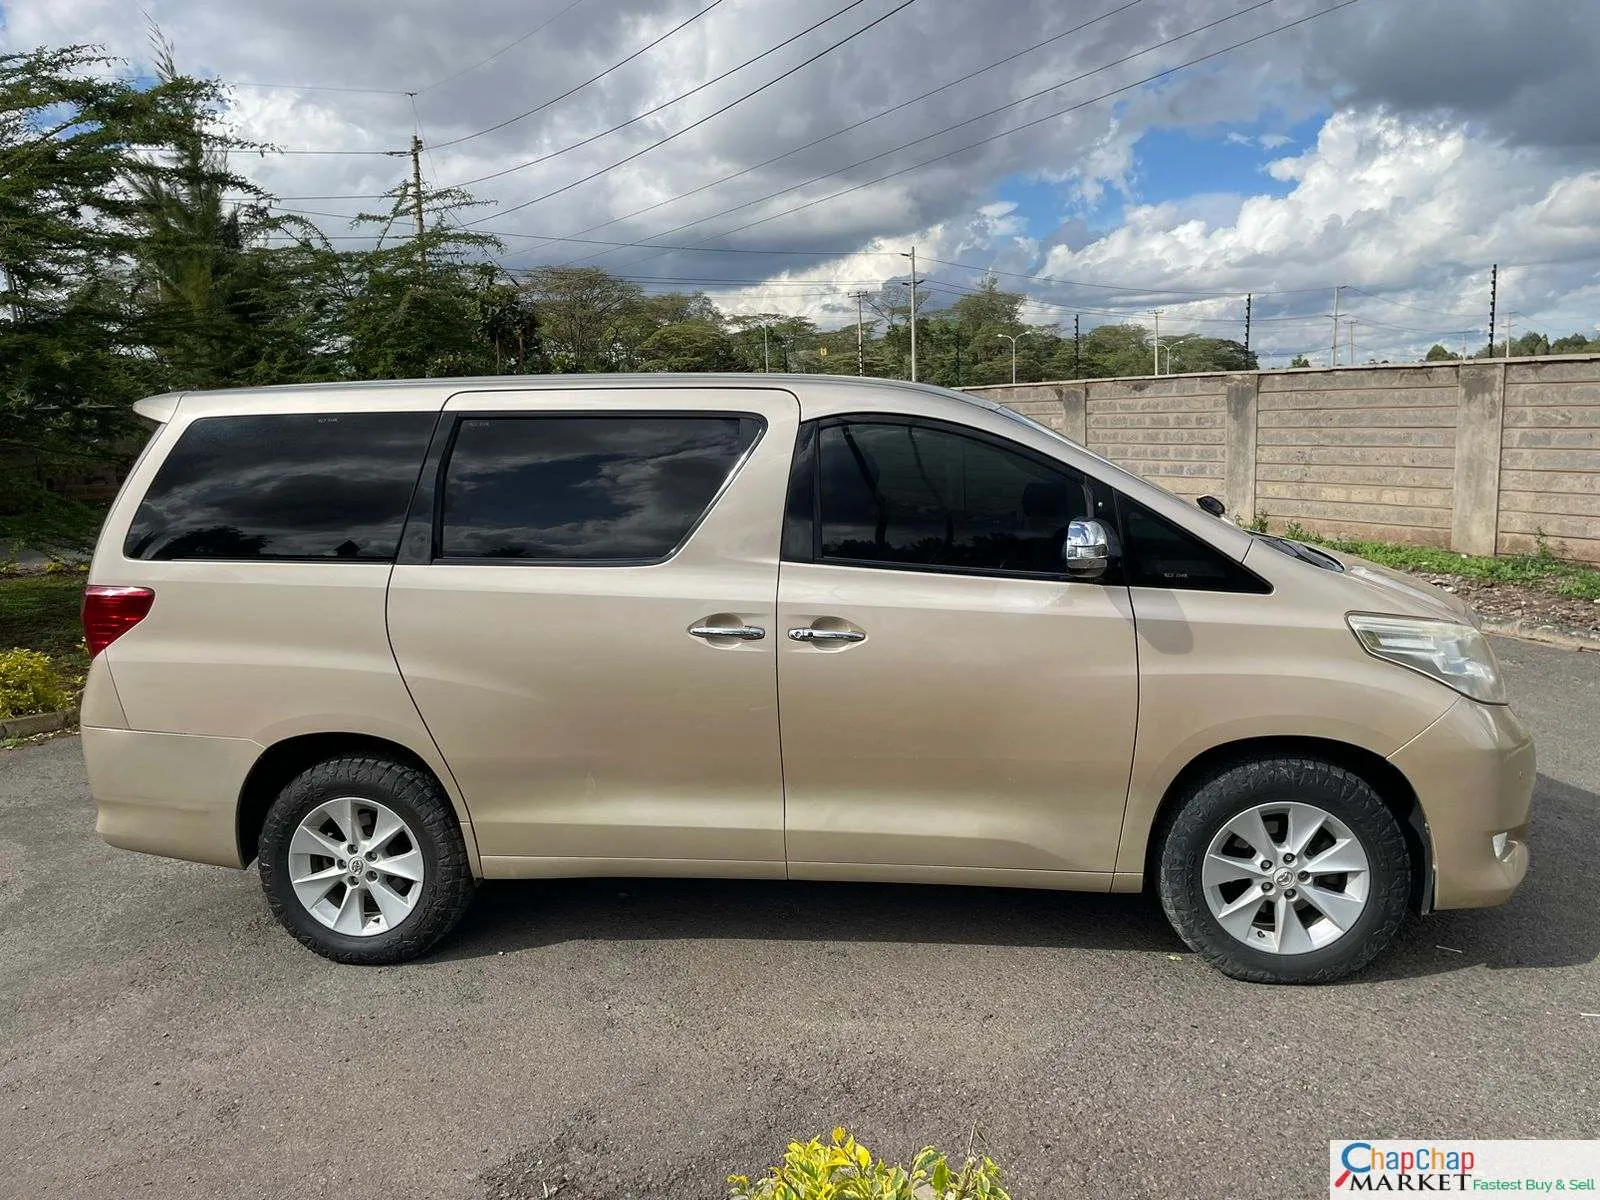 Cars Cars For Sale/Vehicles-Toyota Alphard HOT DEAL You Pay 20% Deposit Trade in OK , Cheapest 8